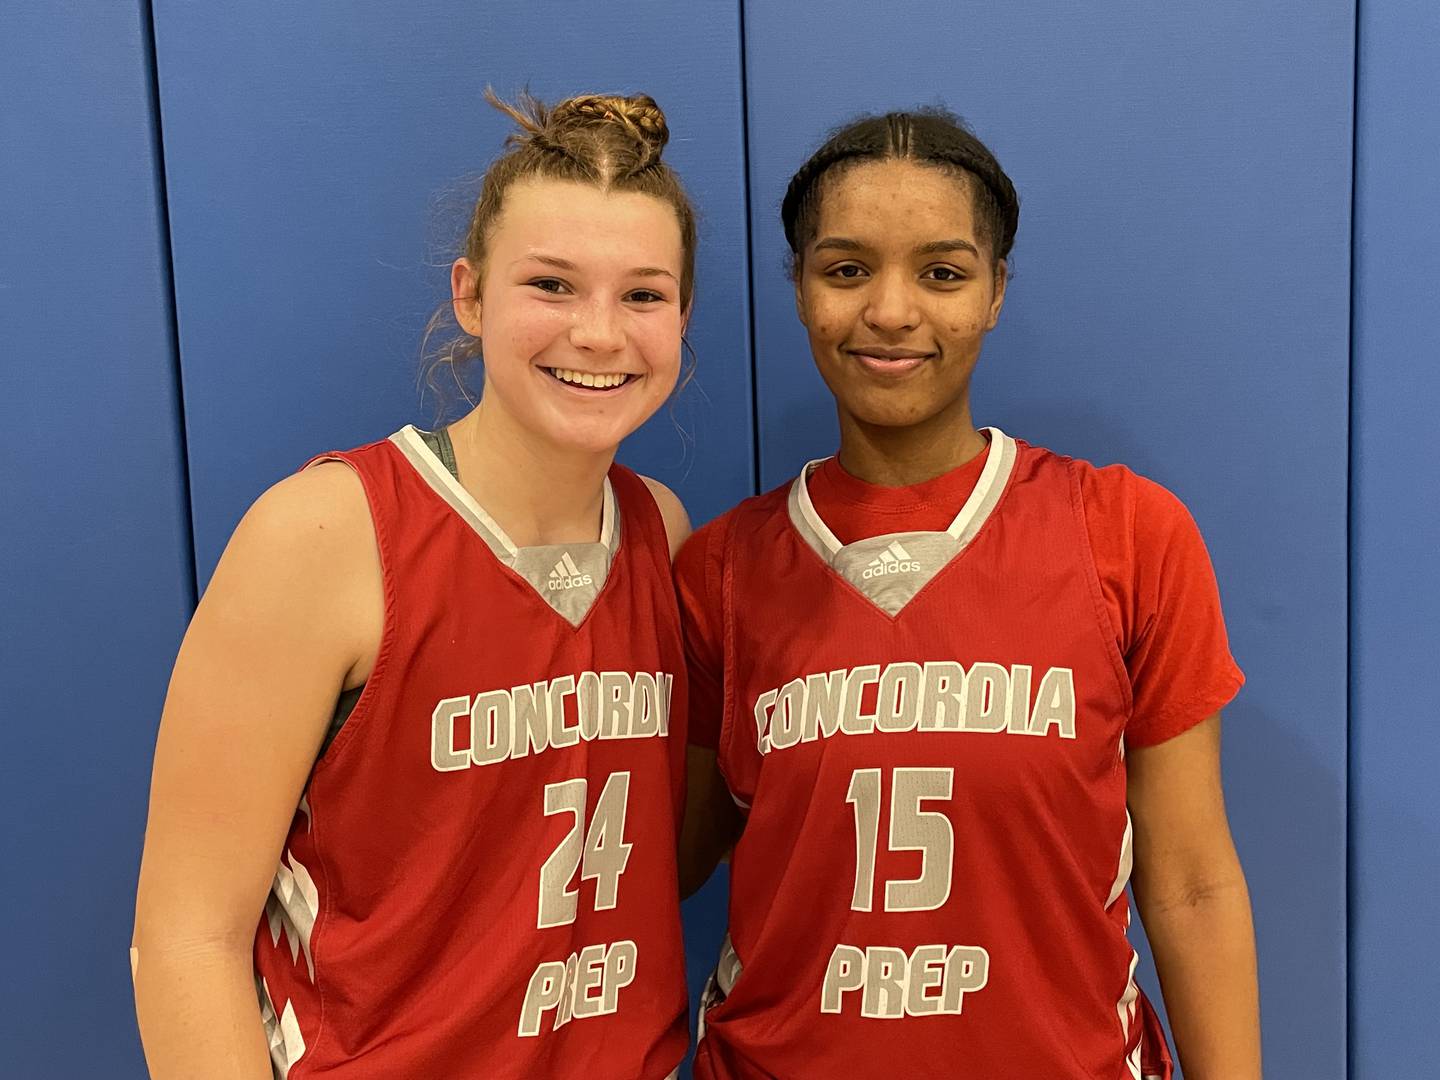 Seniors Hailee Ford (24) and Cori Barnes (15) combined for 25 points and 24 rebounds to lead Concordia Prep past Notre Dame Prep, 46-40, in an IAAM B Conference quarterfinal Tuesday night. Ford hit a 3-pointer to give the fifth-seeded Saints the lead for good. Banres scored 10 of her 19 points in the final 5:16 as the Saints rallied from 12 points down early in the fourth quarter.